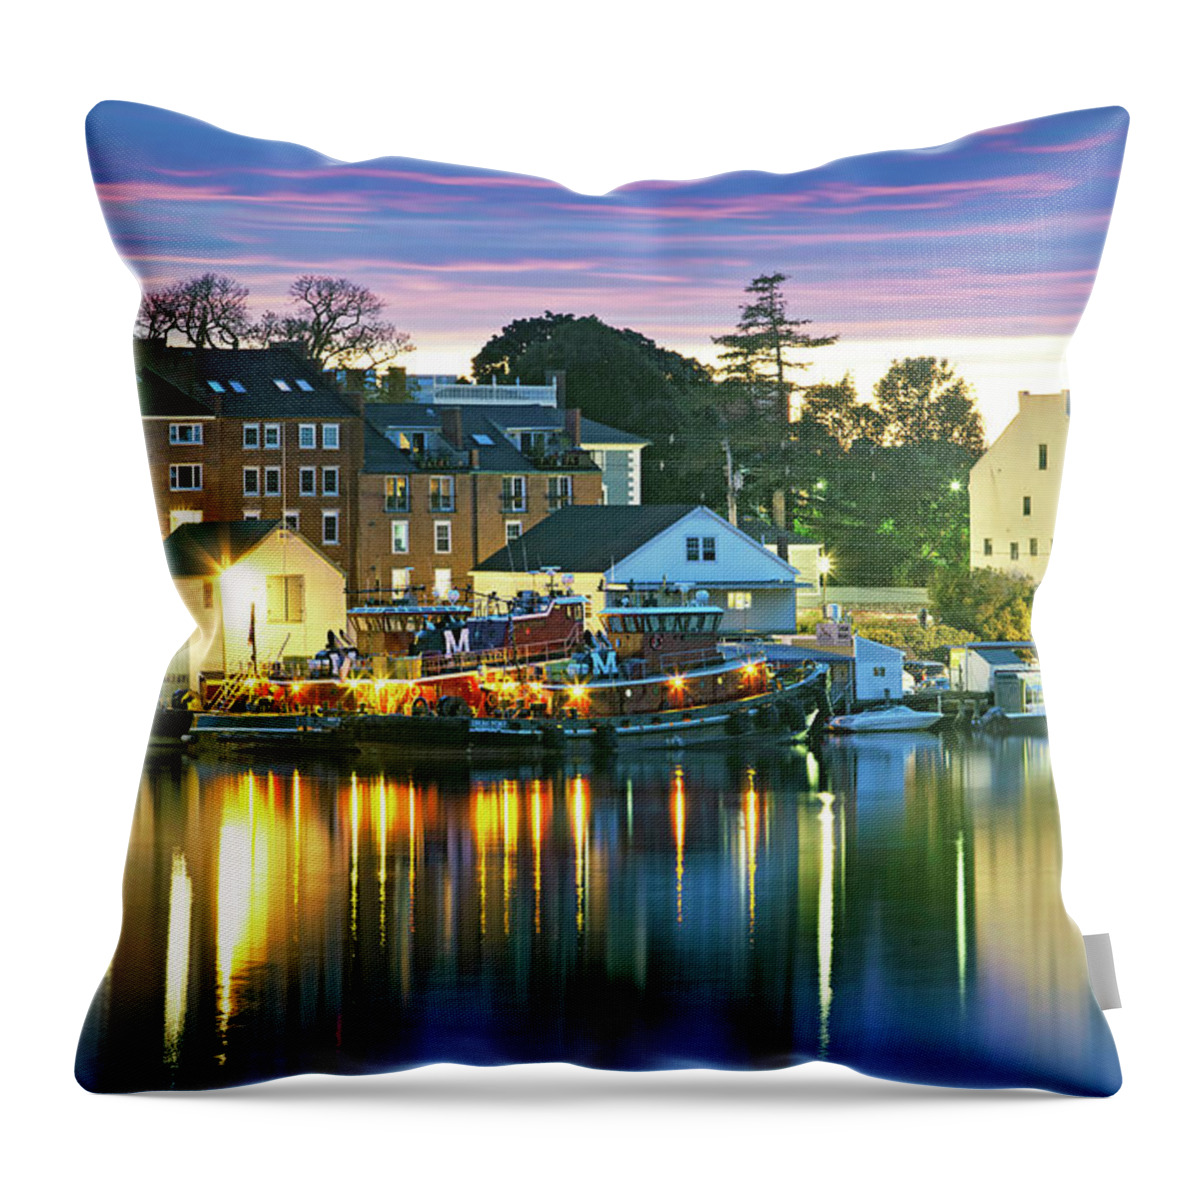 Harbor Lights Throw Pillow featuring the photograph Harbor Lights by Eric Gendron